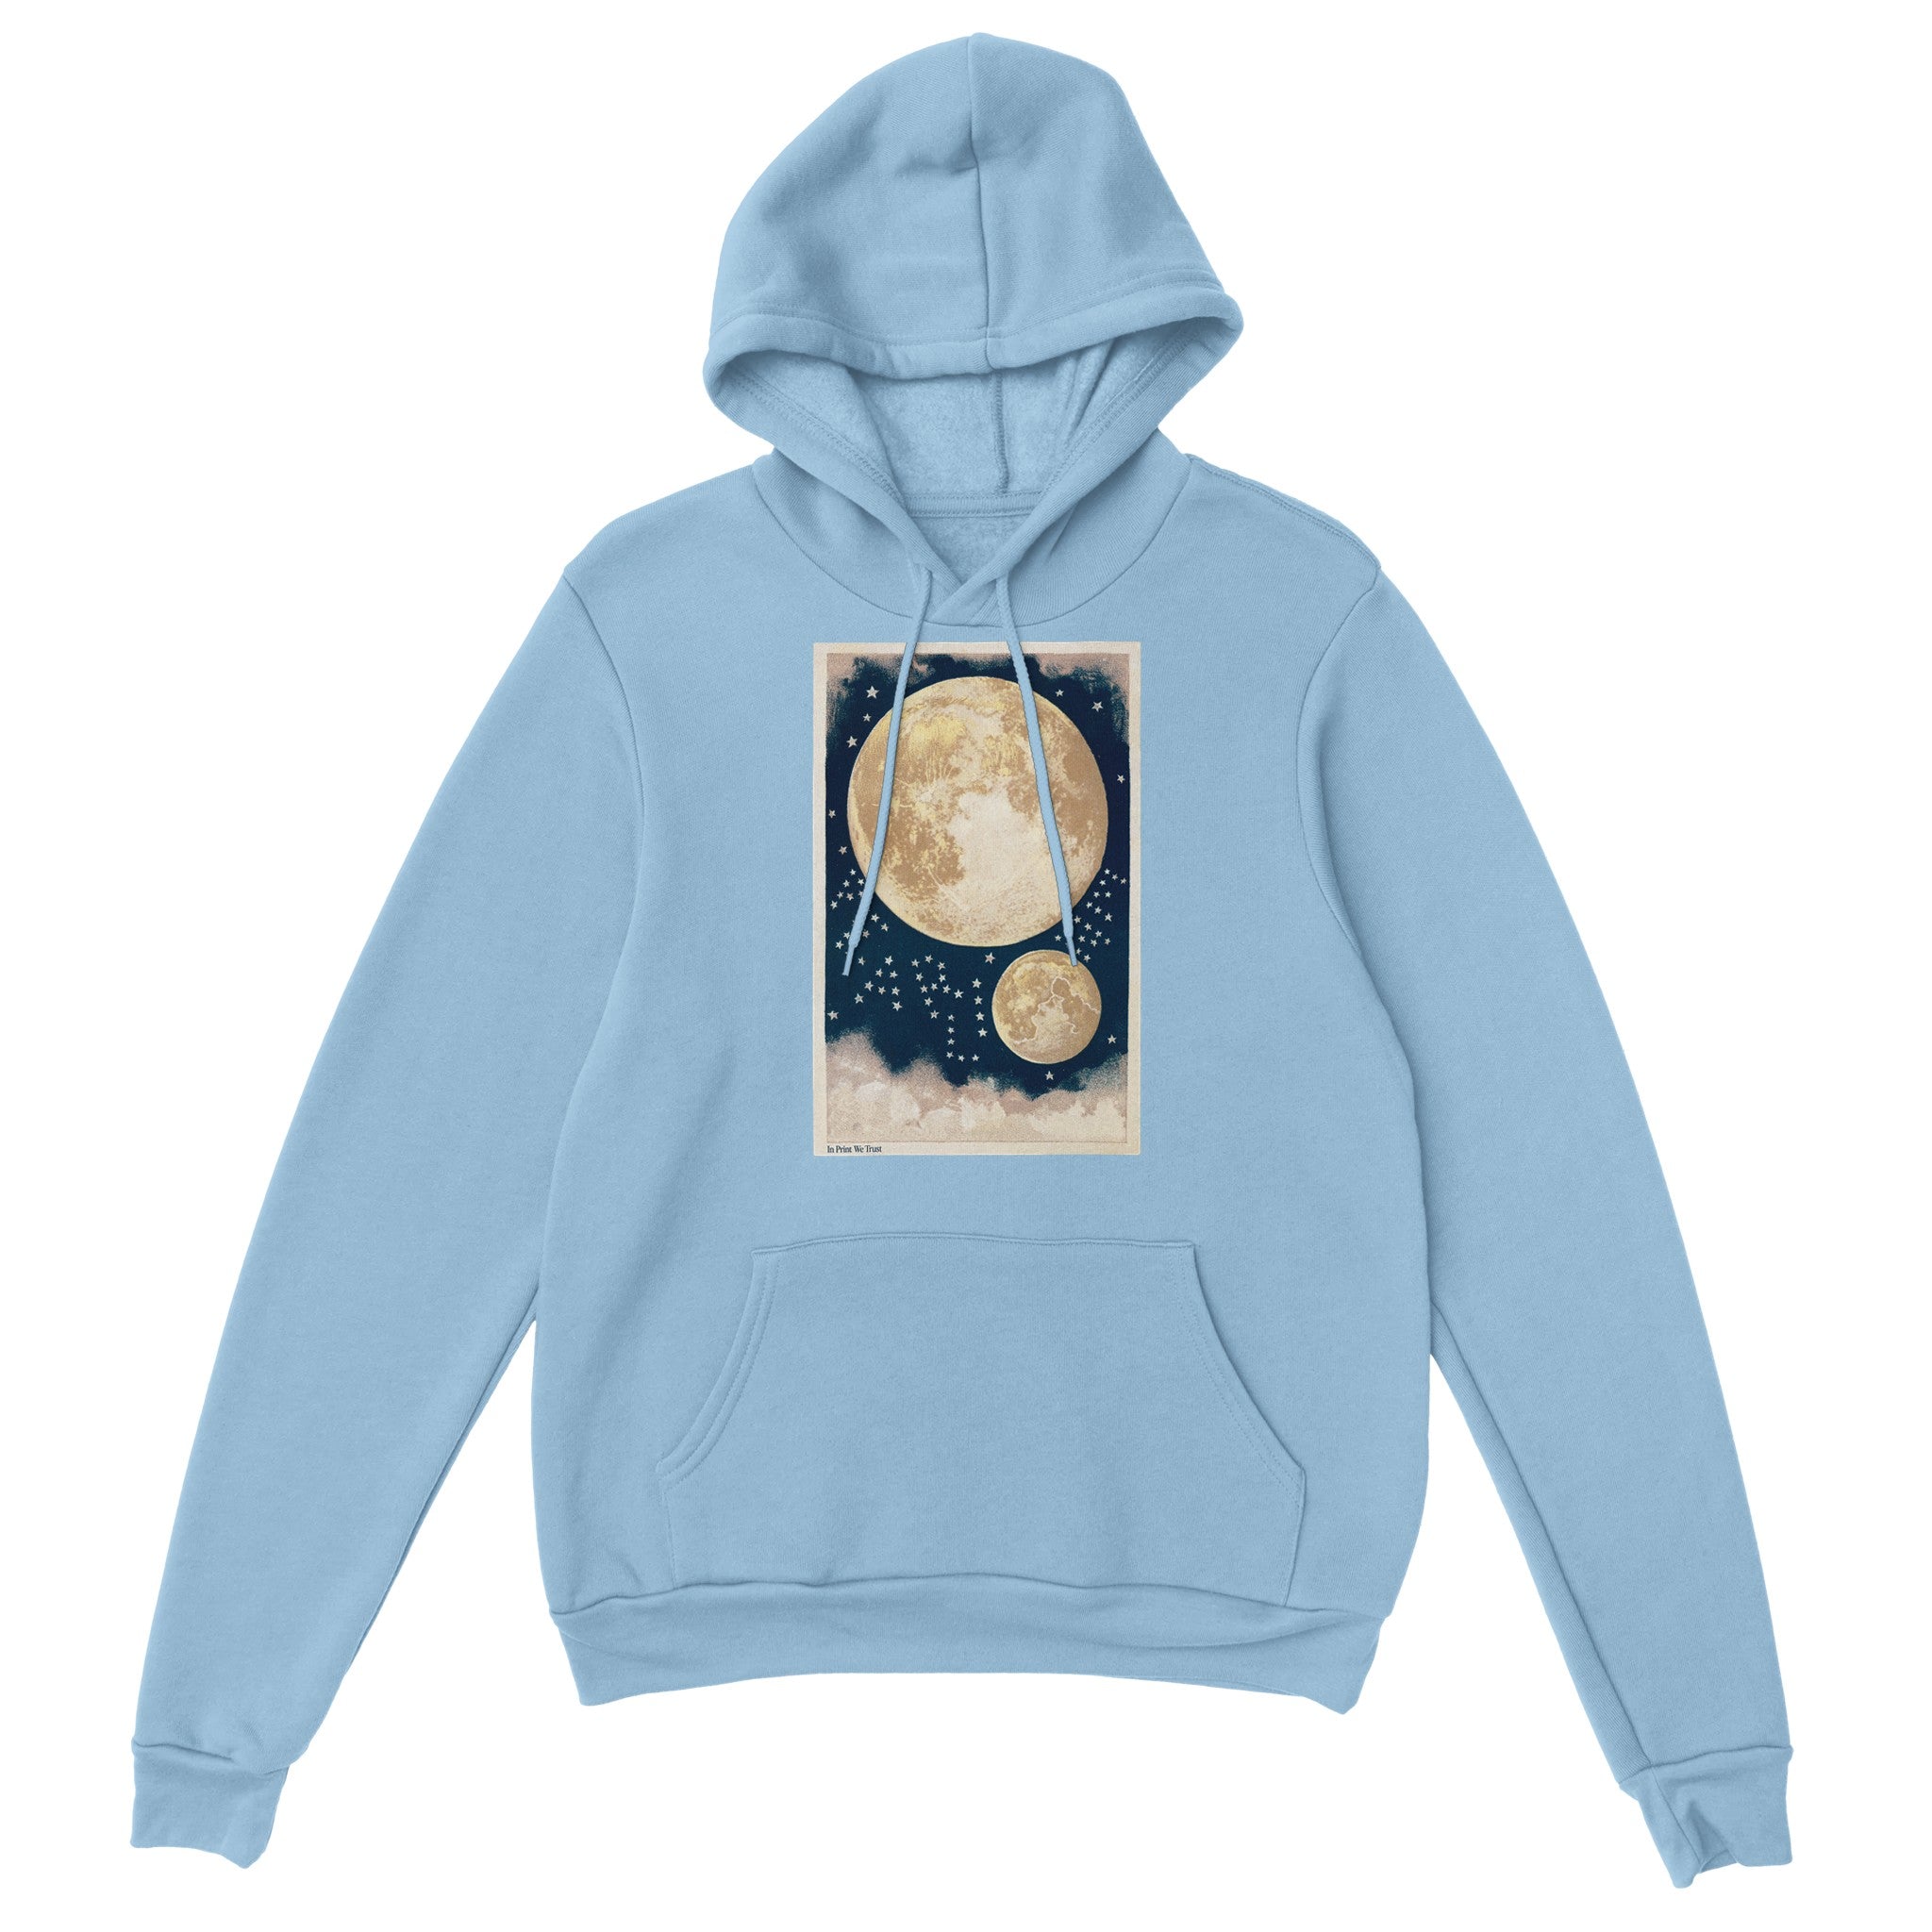 'To the moon and back' hoodie - In Print We Trust